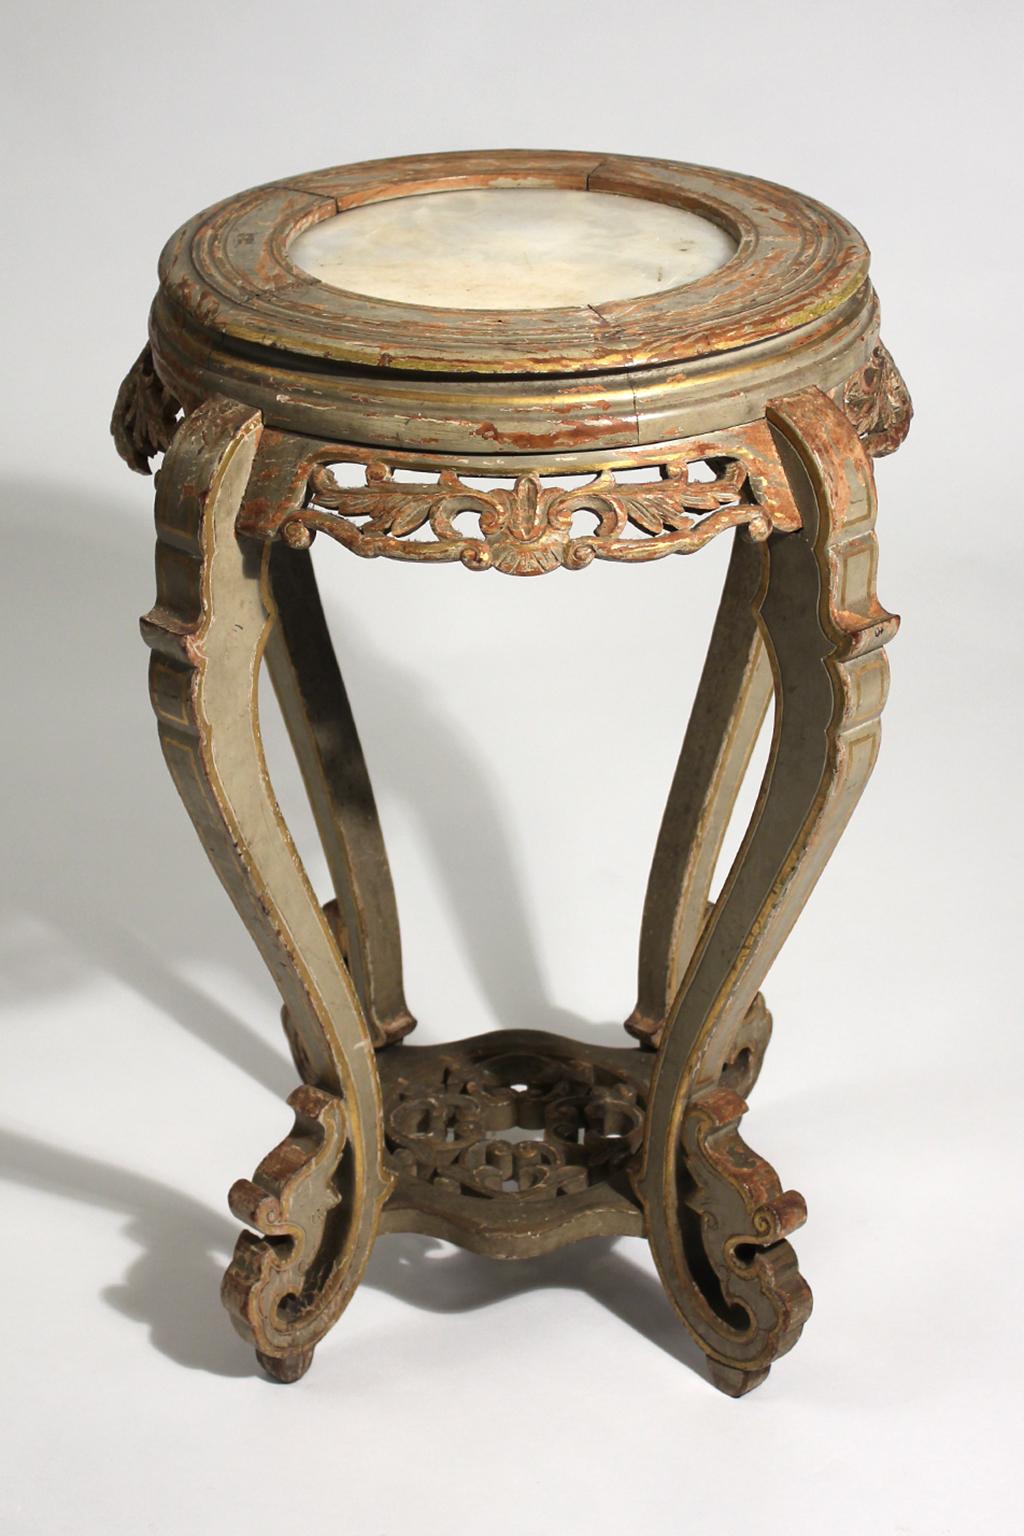 Very unique decorative French marble top side table dating from the 1800s. Great Baroque Revival style. Hand carved with great detail. Has the remains of the original painted surface. Color is gray with hand painted gold gilt accents. Top is made of